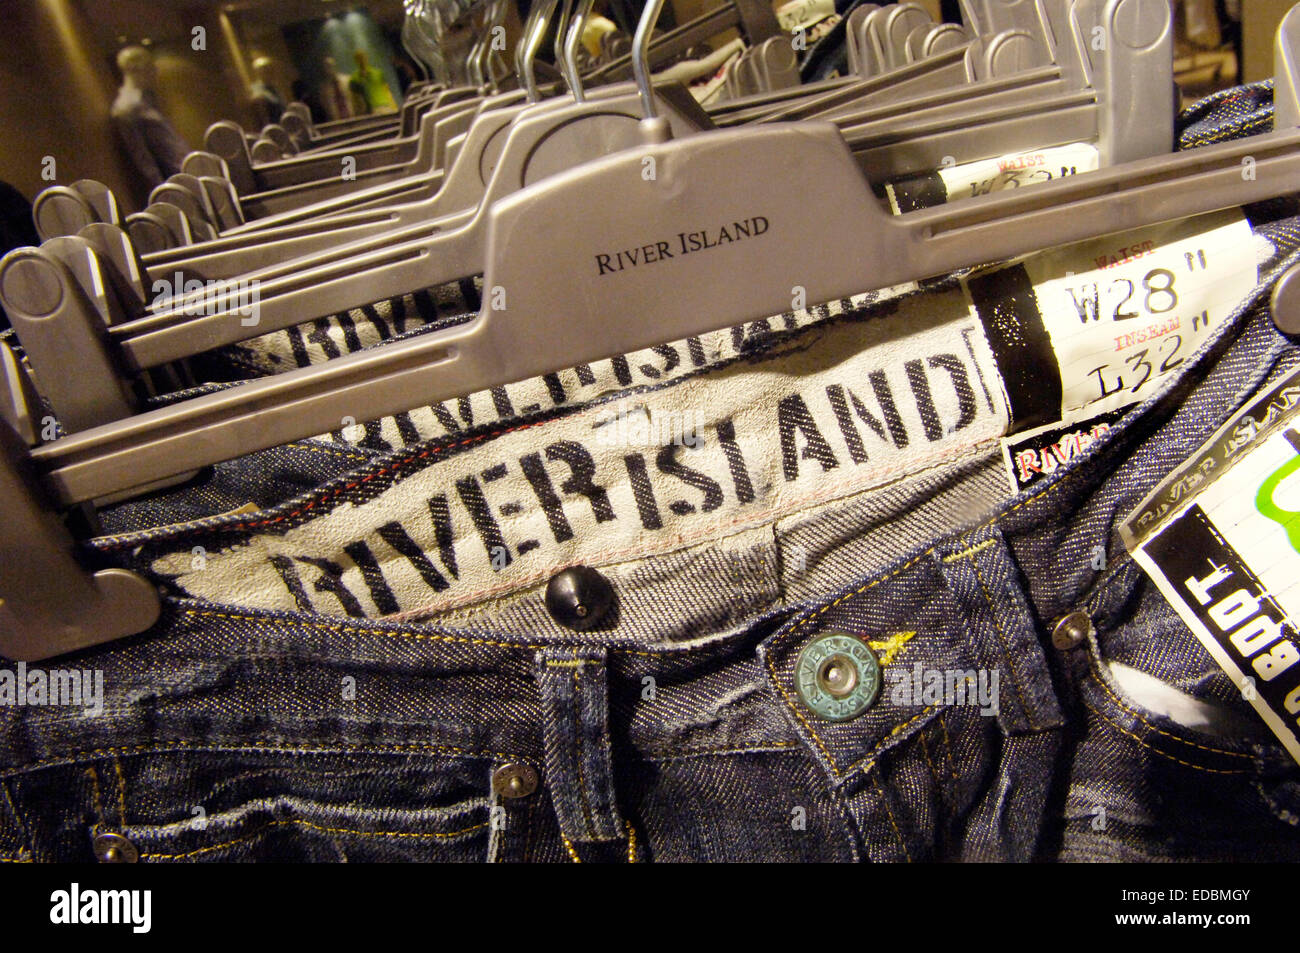 Jeans hanging, instore, River Island, London, England Stock Photo